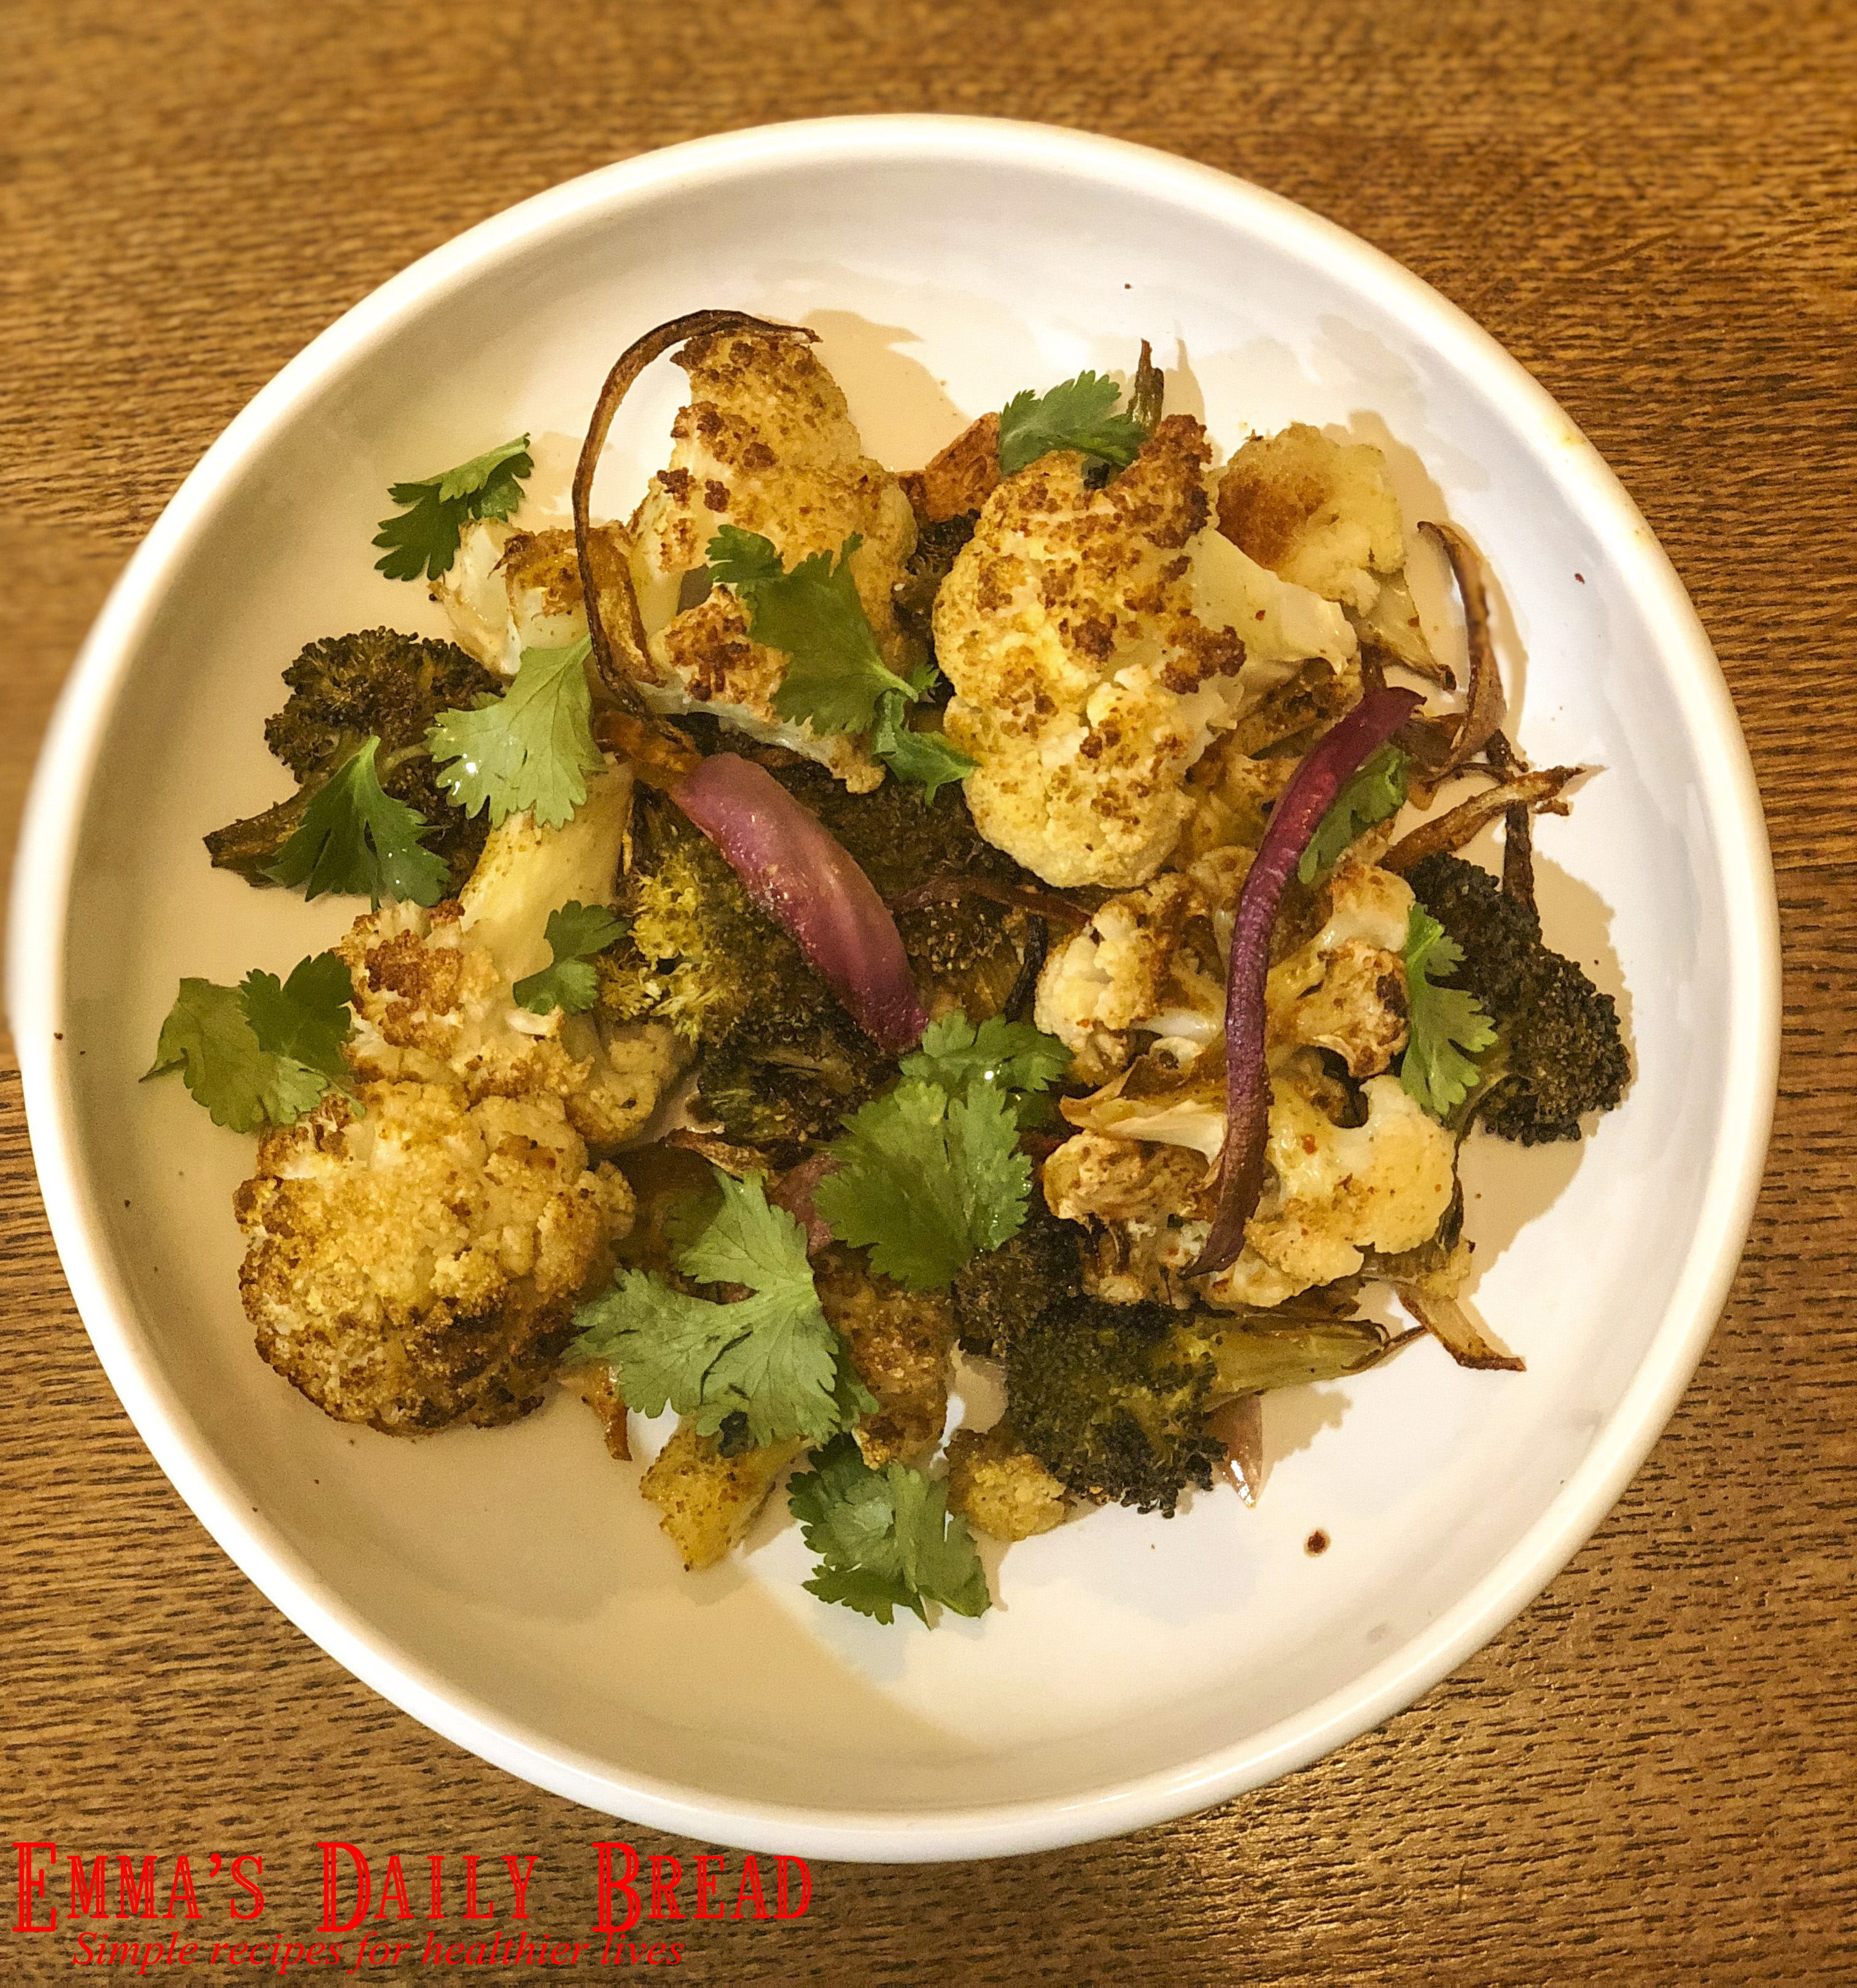 Roasted Broccoli & Cauliflower With Curry Spices